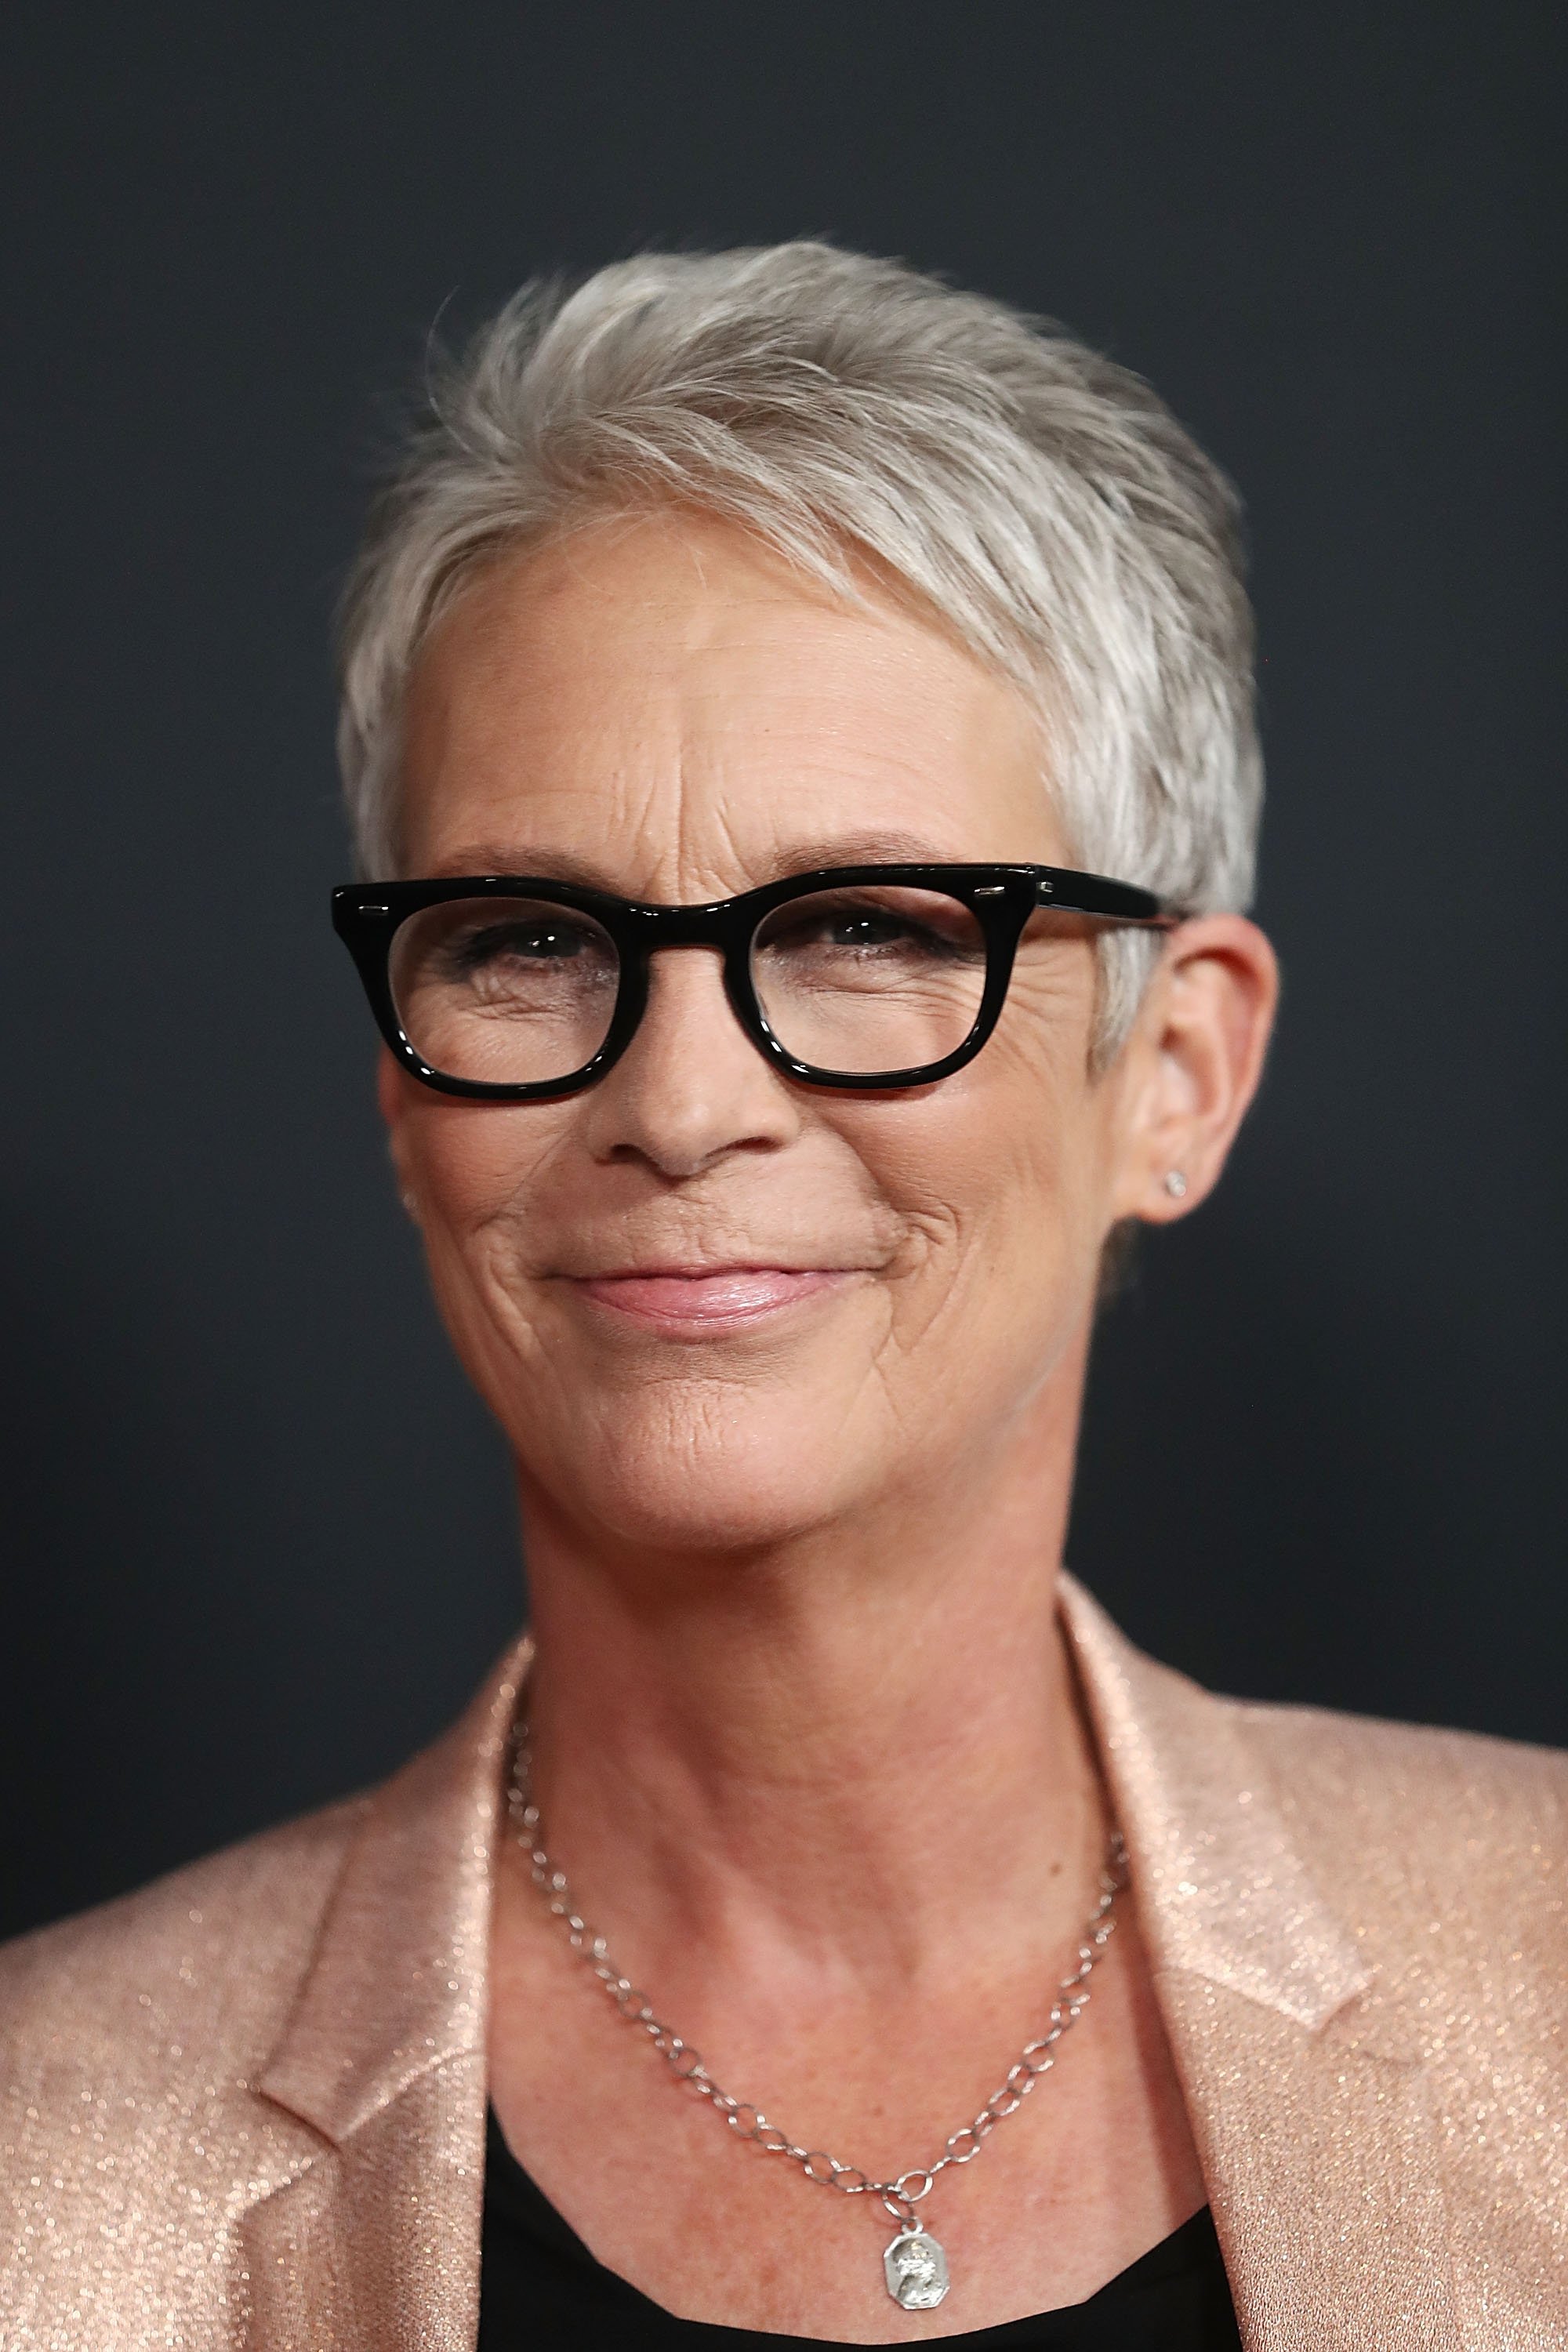 Jamie Lee Curtis attends the Australian Premiere of Halloween on October 23, 2018, in Sydney, Australia. | Source: Getty Images.